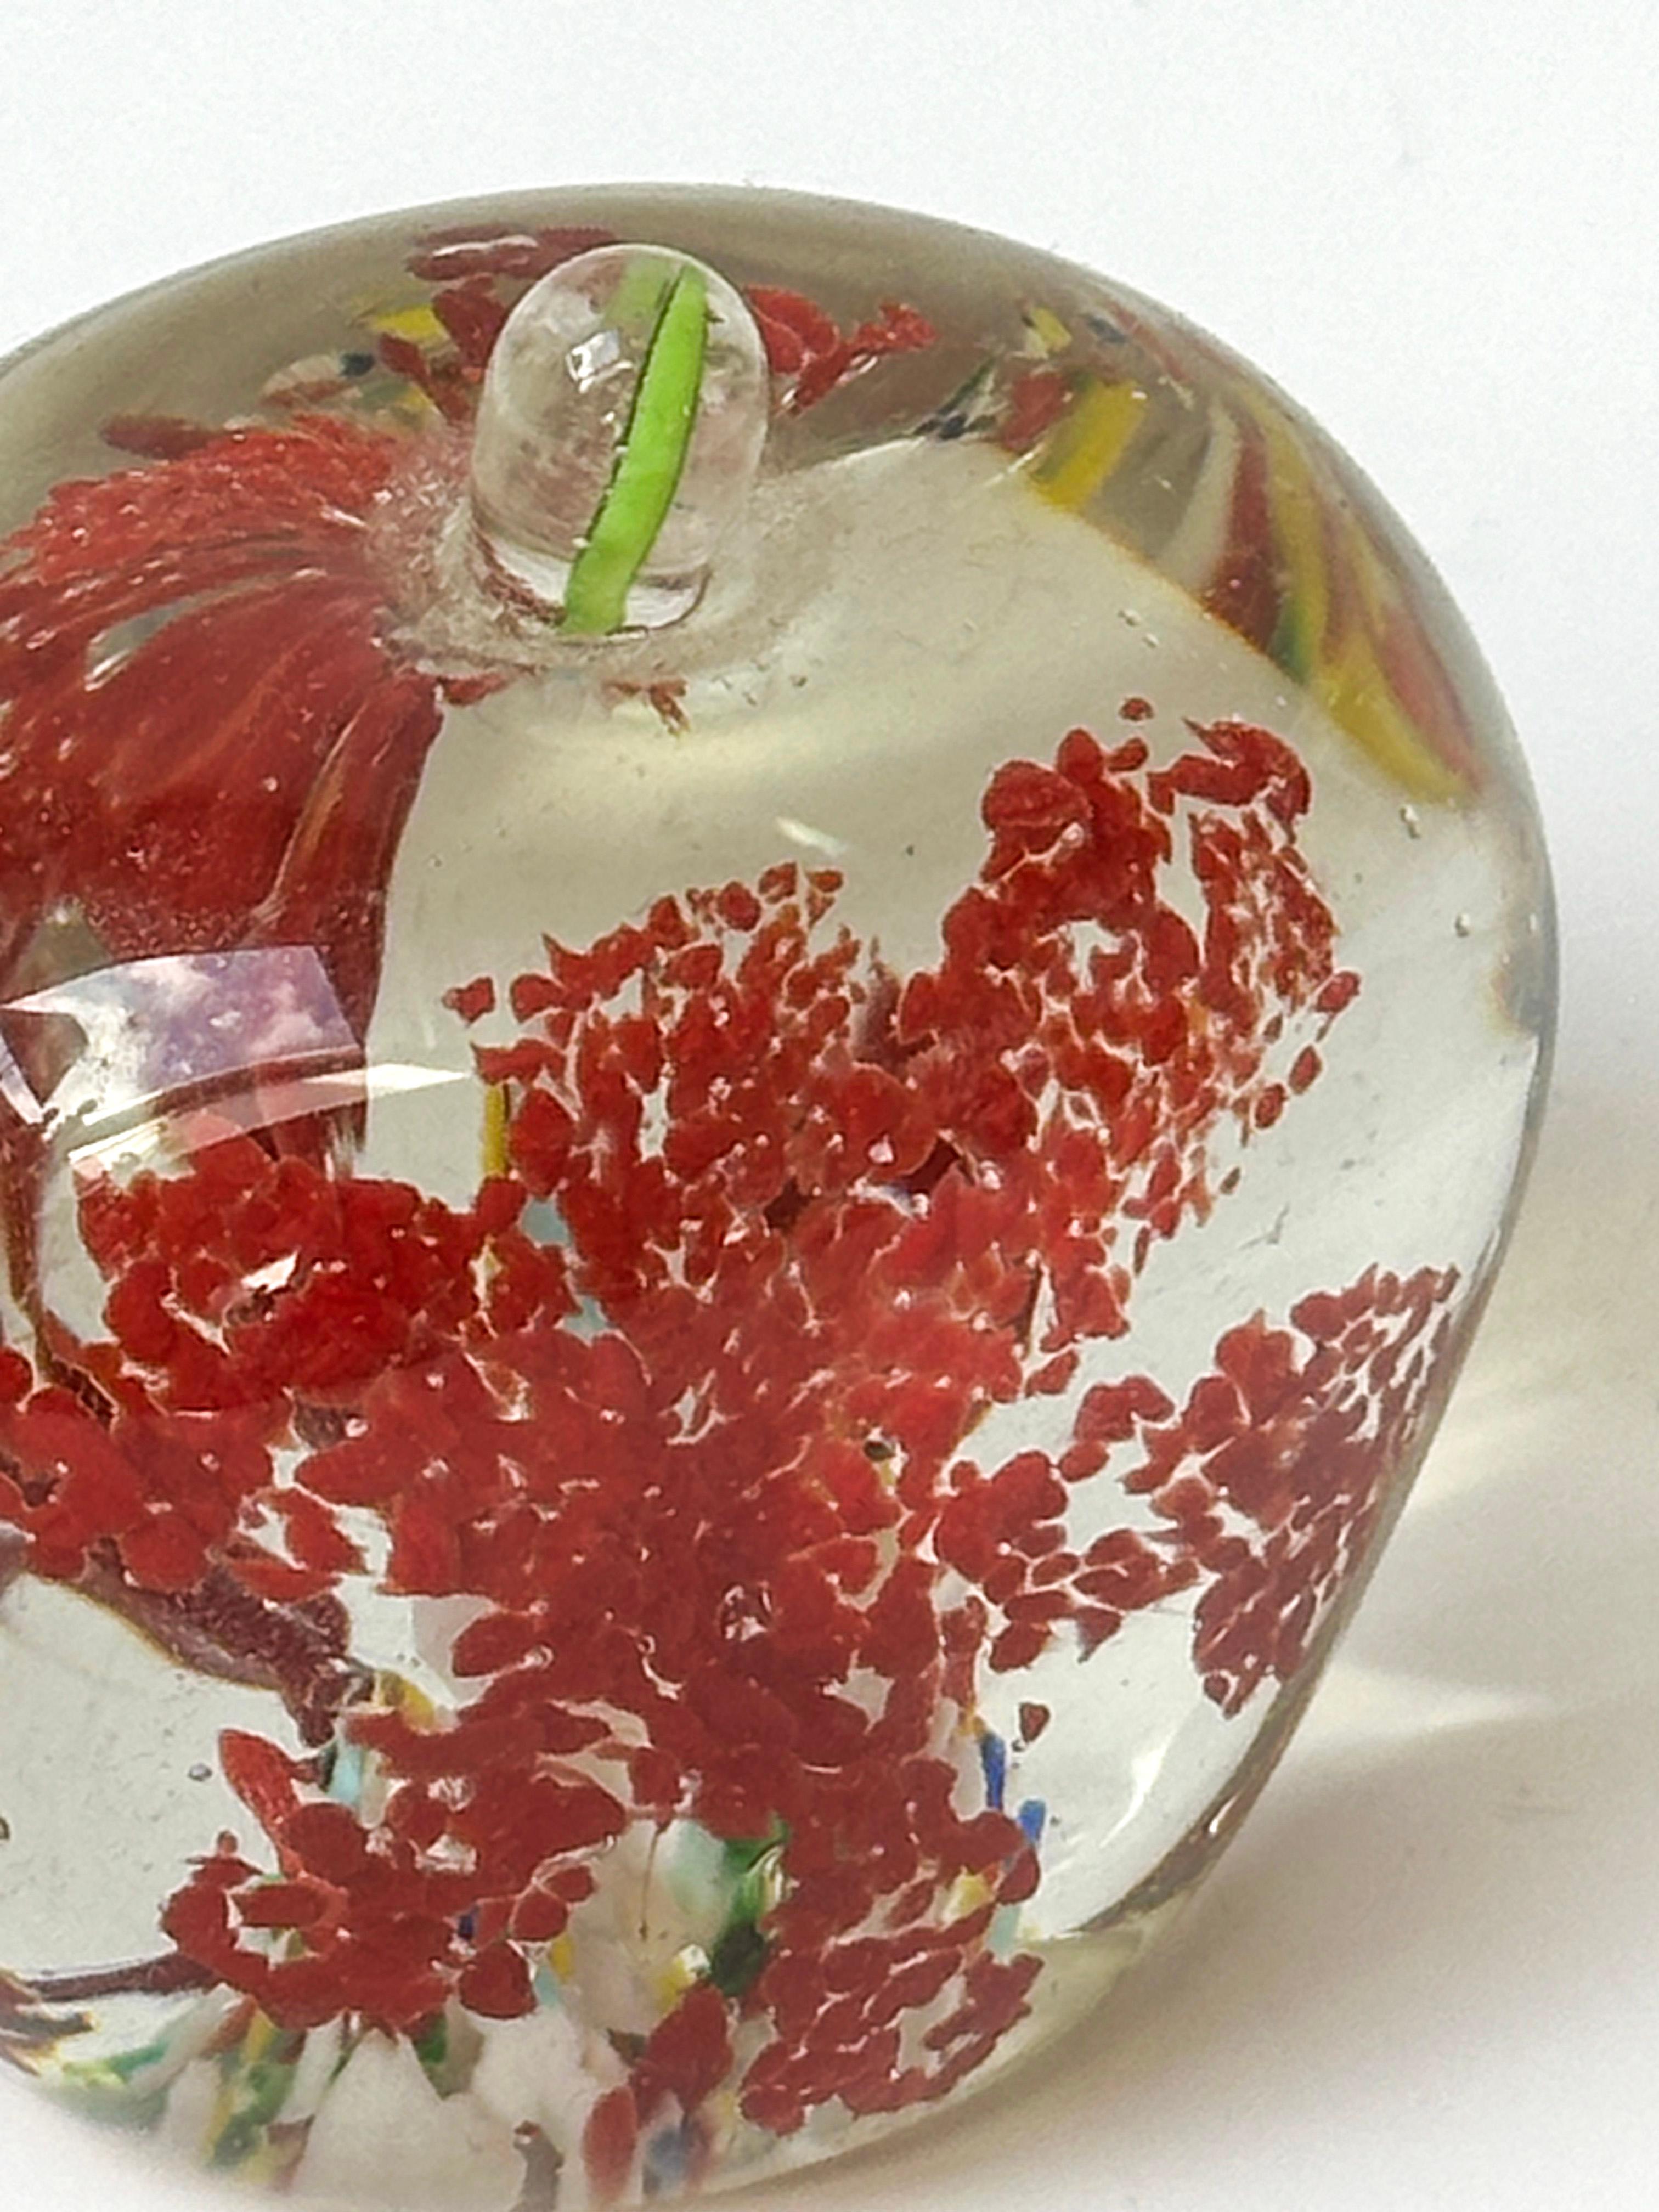 This vintage Murano glass paperweight, shaped in the form of an apple, showcases handcrafted skill and excellence with its intricate internal details and technical creativity. It exemplifies the glassblower's fine skills, displaying a captivating